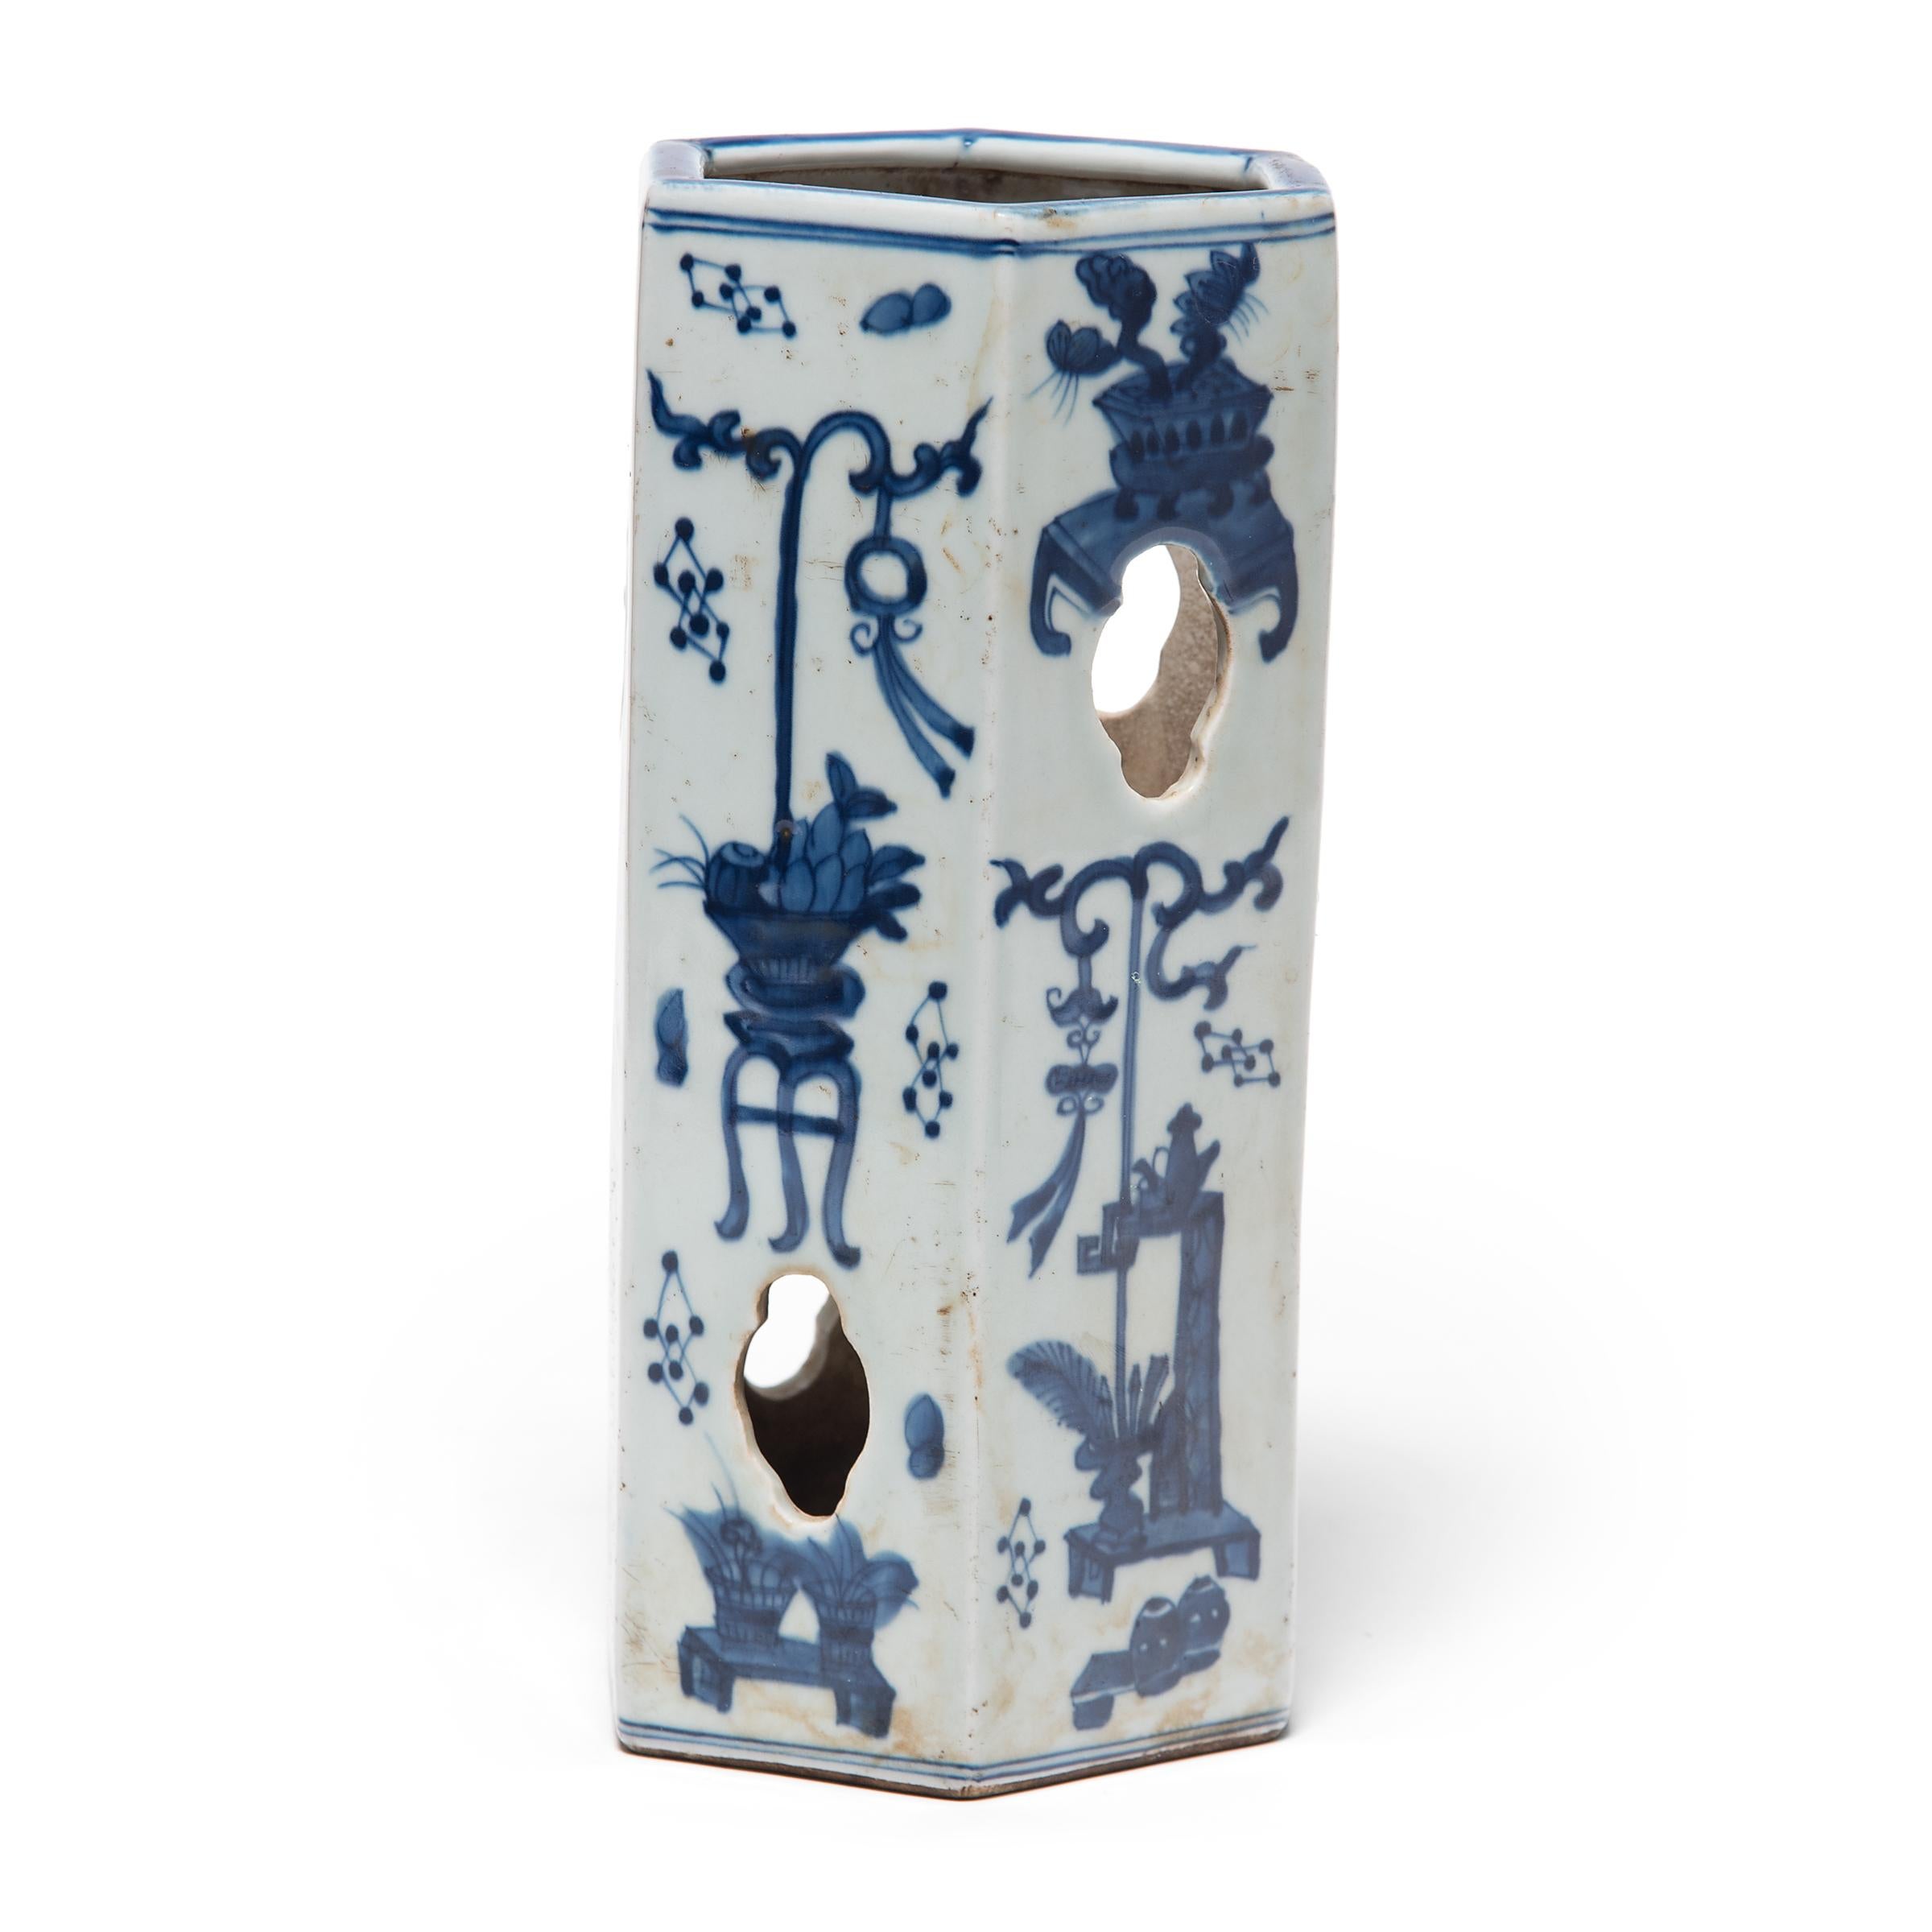 Accented with quatrefoil cutouts to provide airflow, this 19th century porcelain hat stand was once used by a Qing-dynasty gentleman to display his cap while it wasn't being worn. The six-sided hat stand is painted with fanciful arrangements of